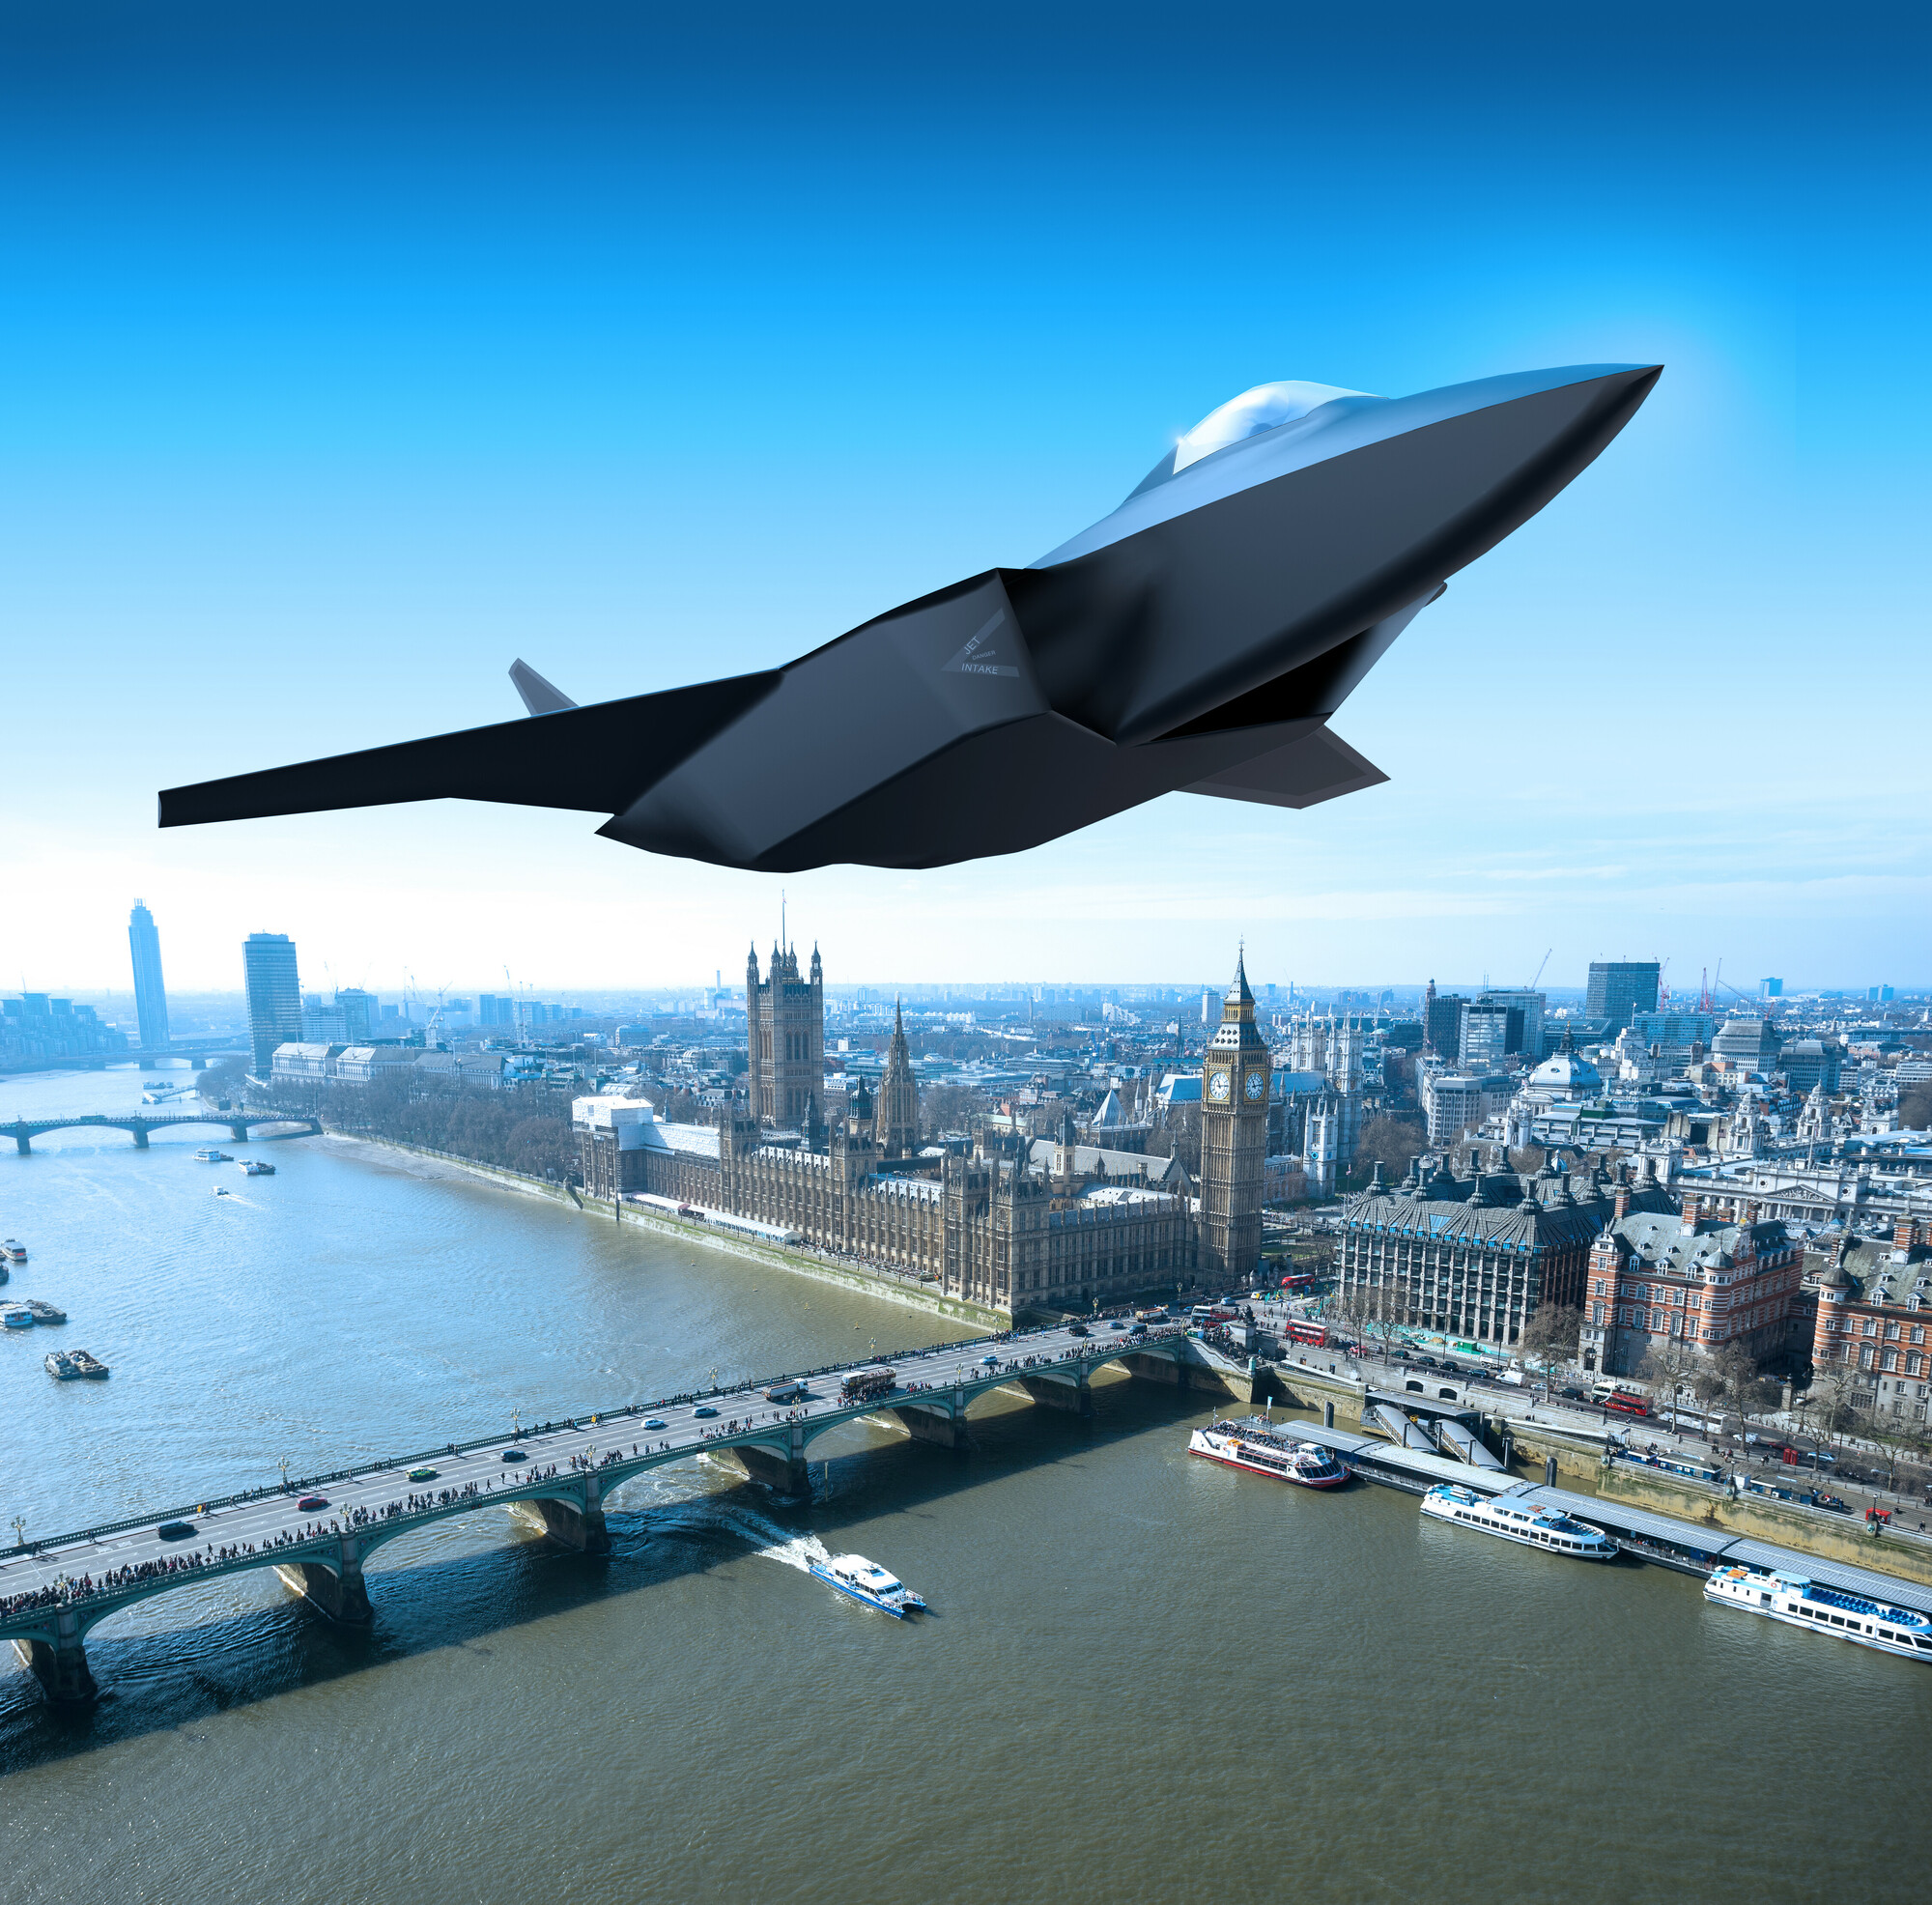 Digital graphic of next generation tempest aircraft in flight over London Thames river.